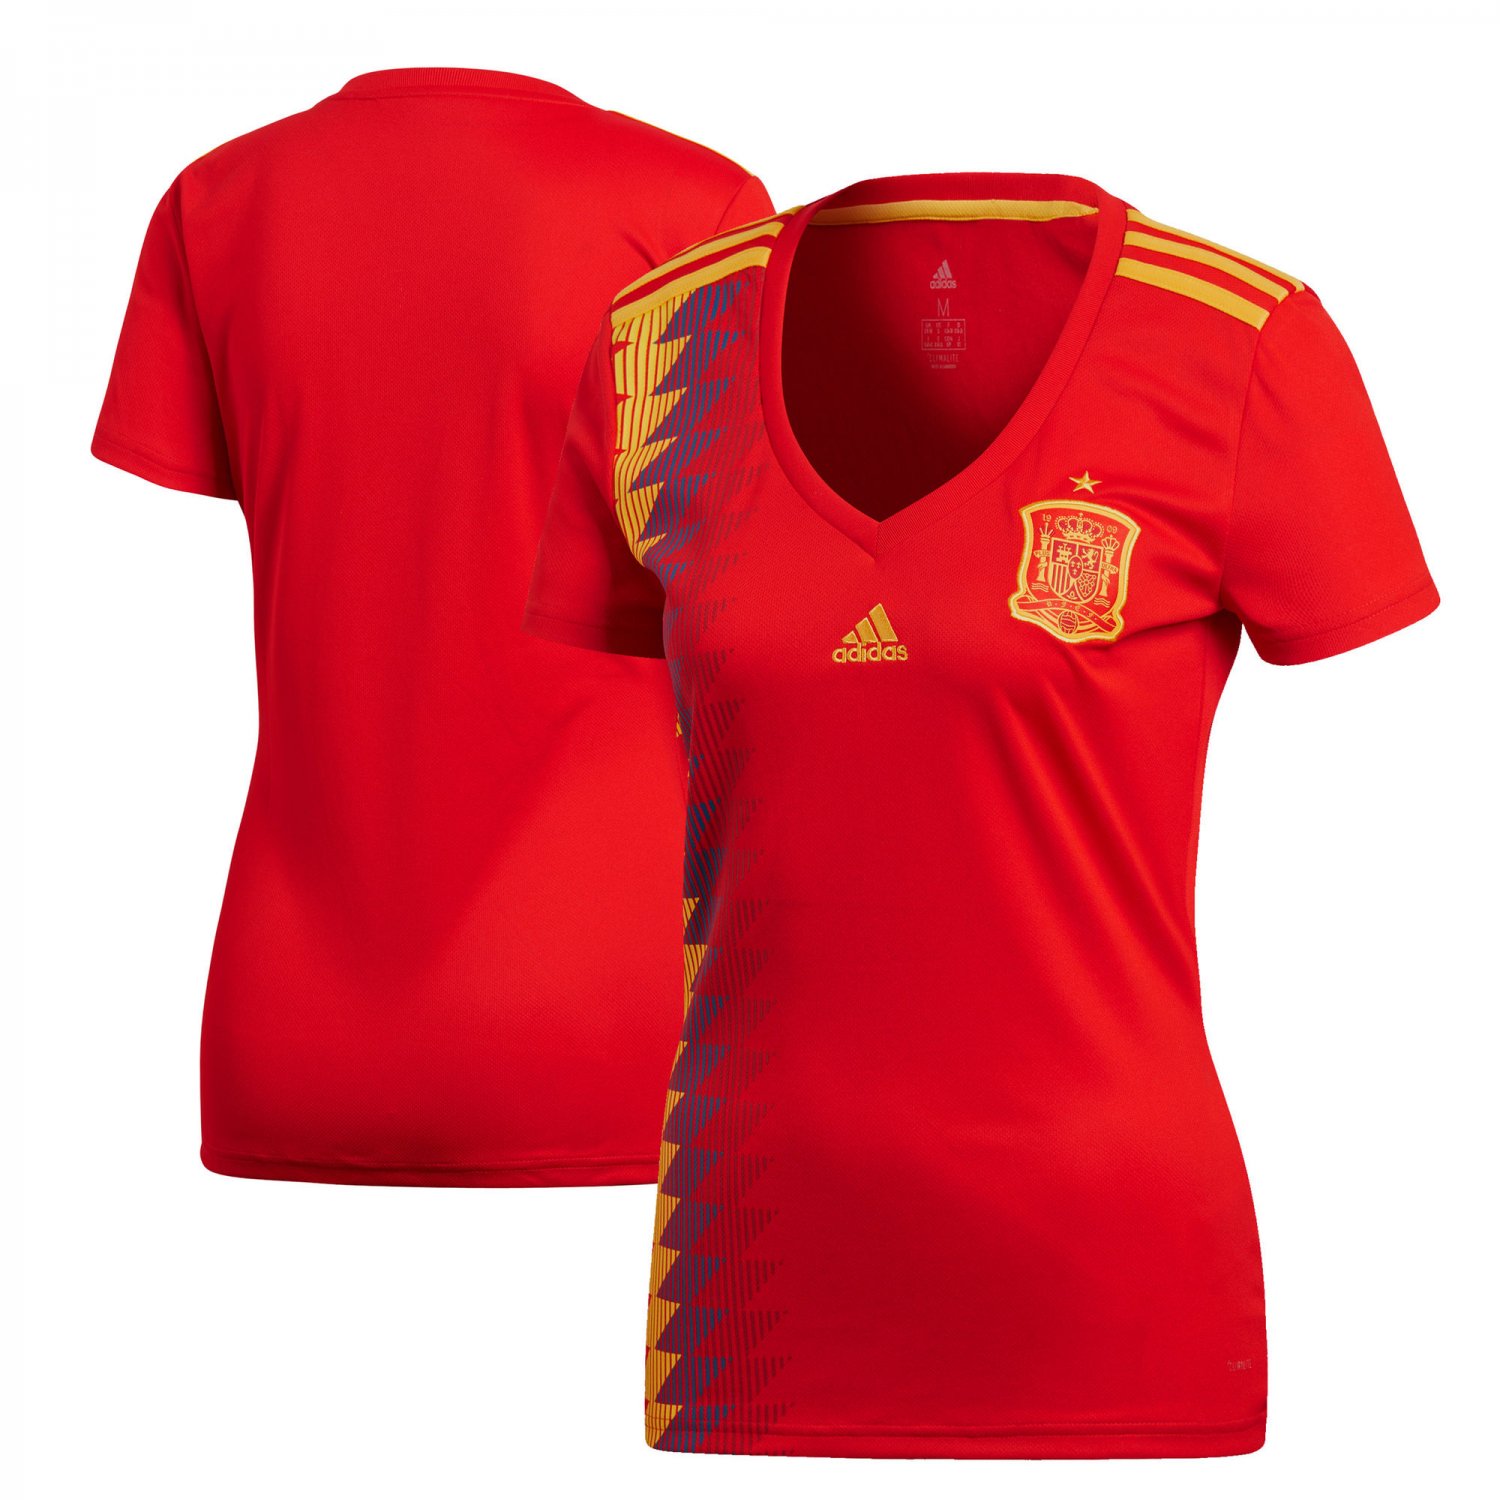 Women's Spain National Team 2018 Home Soccer Jersey - red